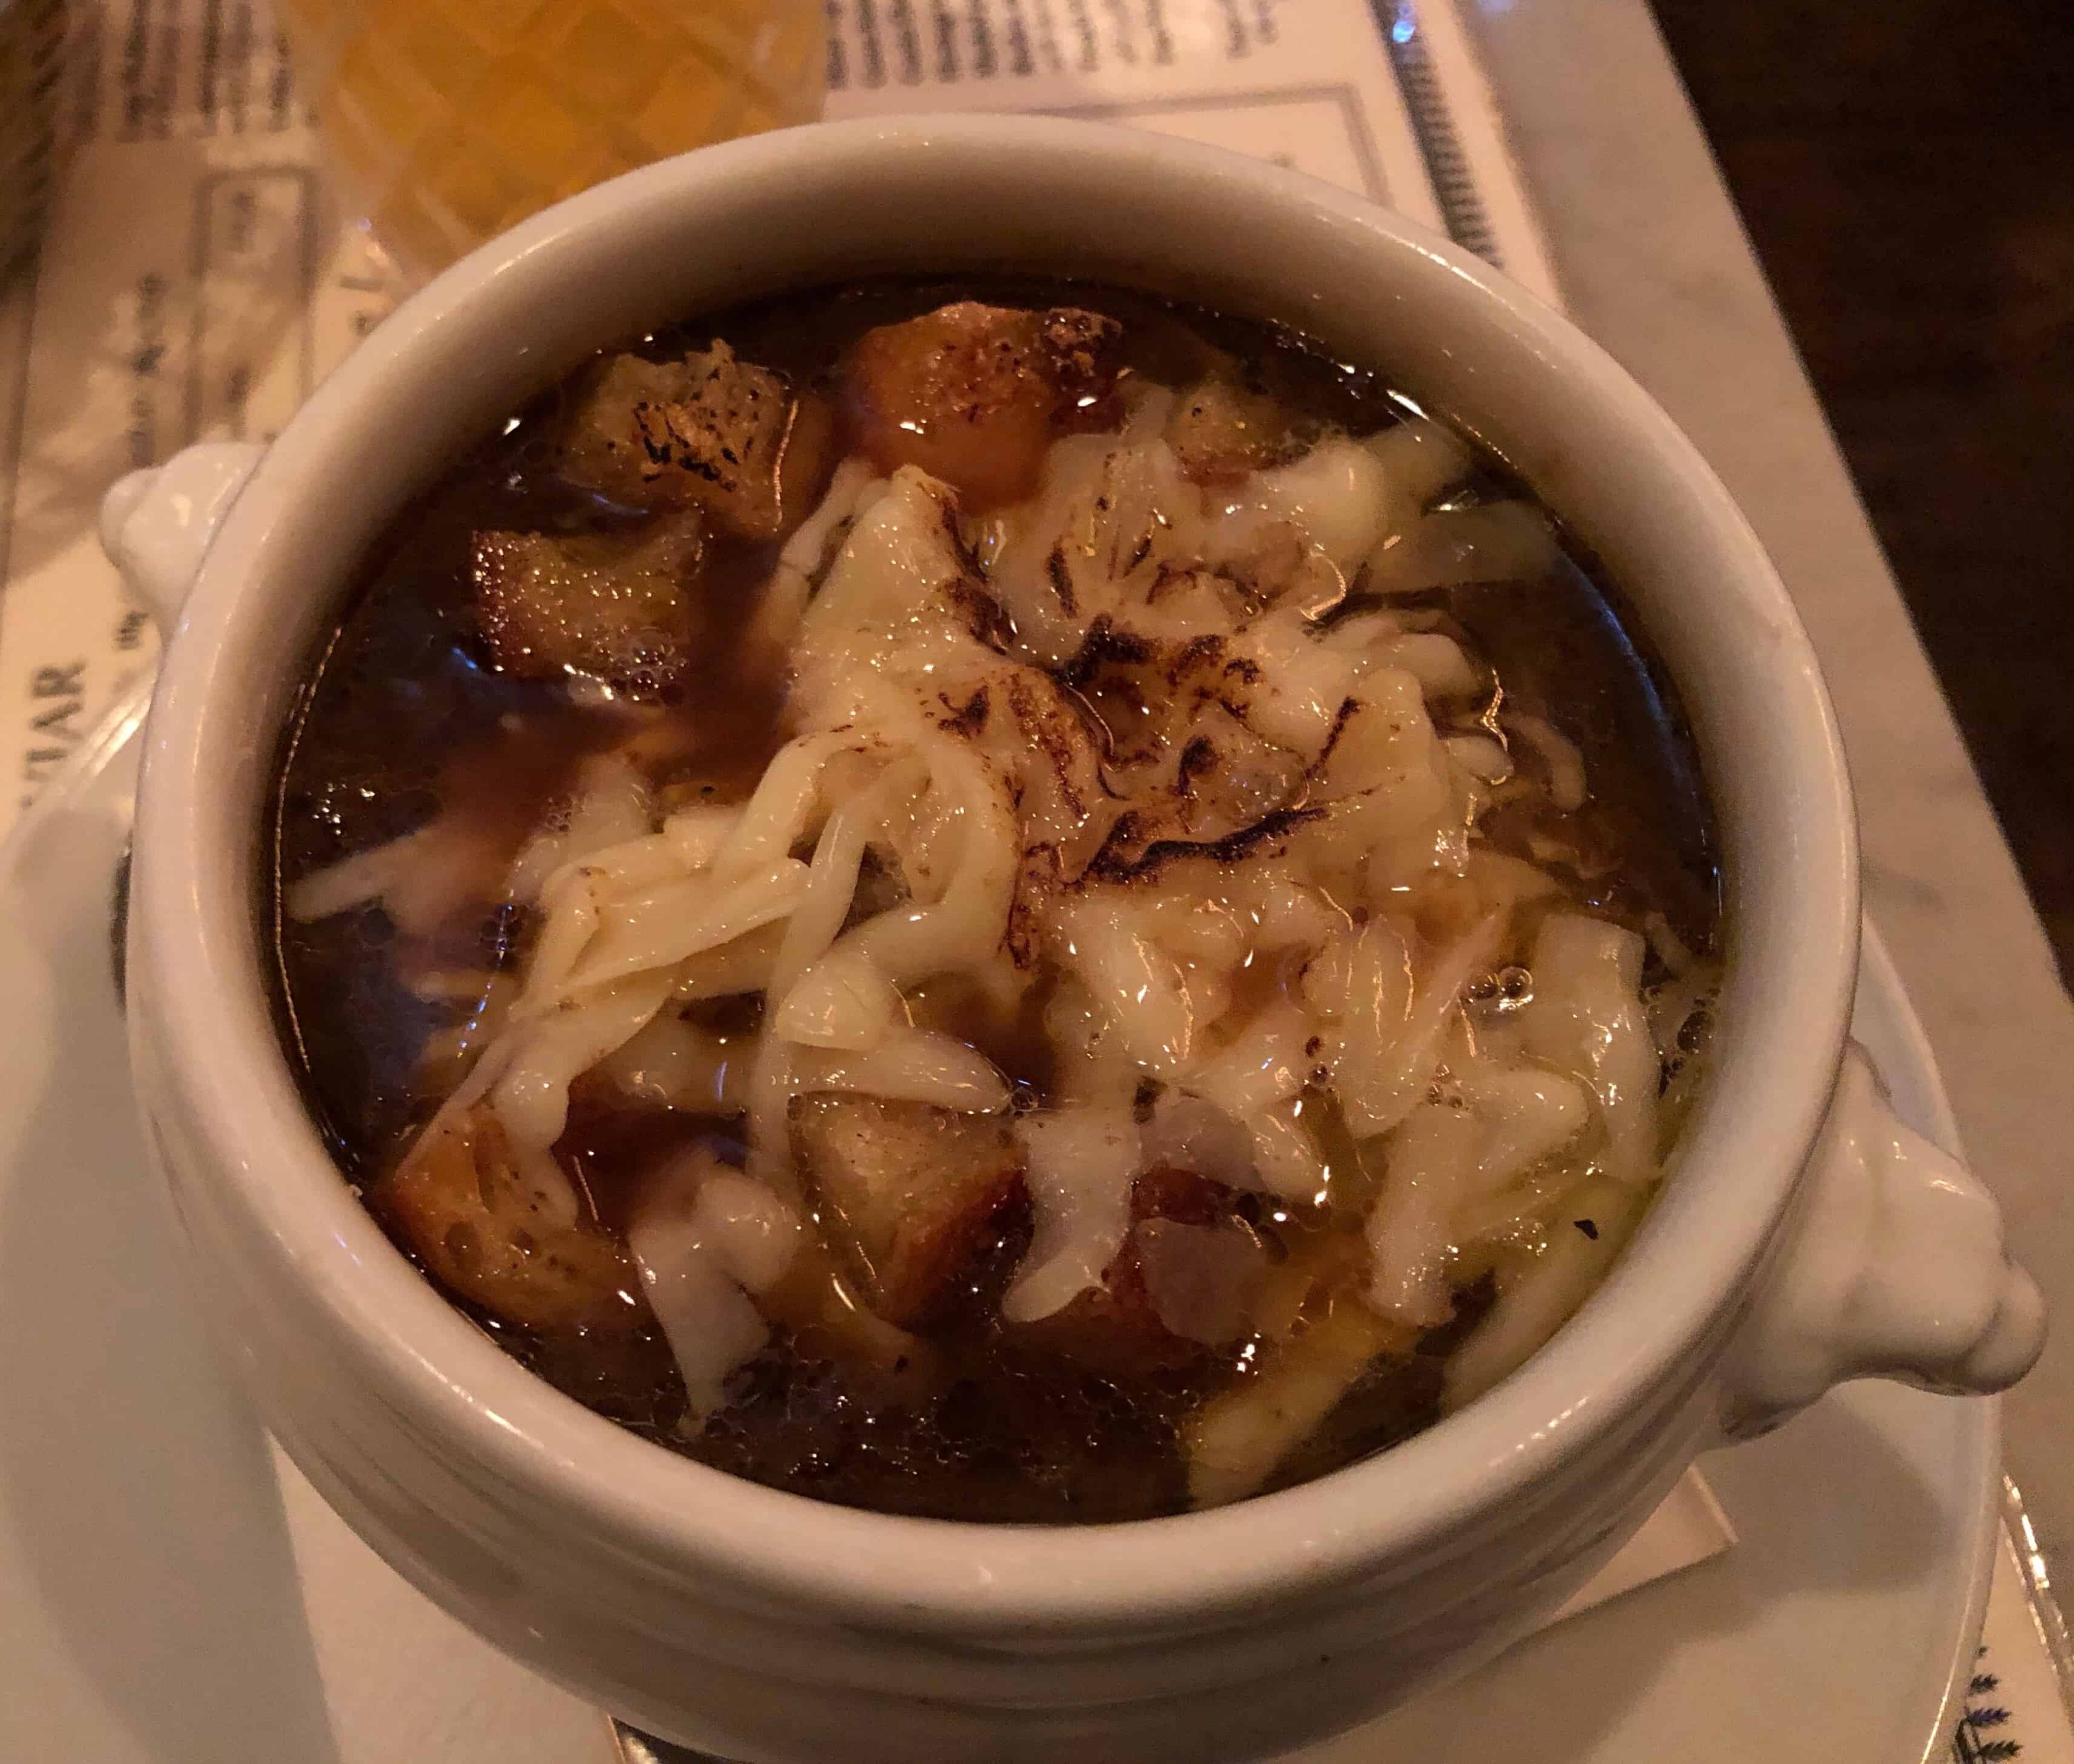 French onion soup at Randall & Aubin Soho in London, England